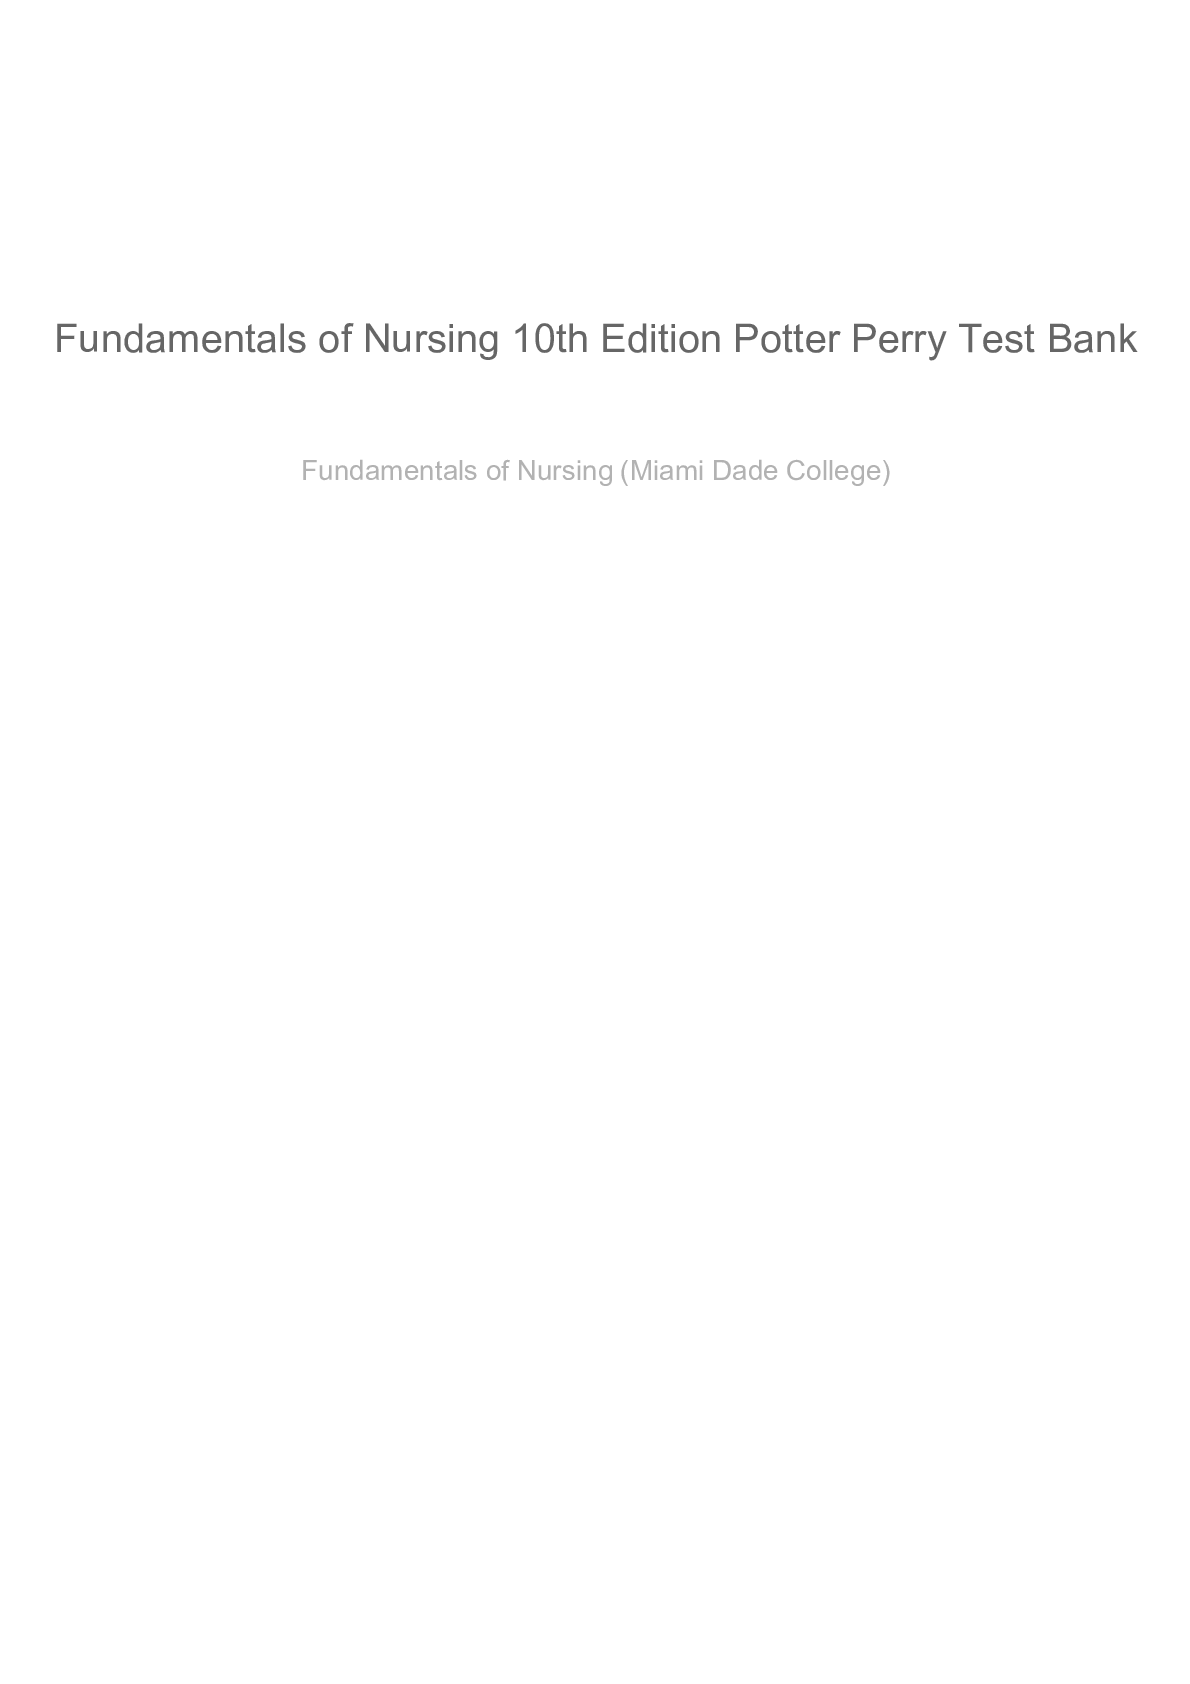 Fundamentals of Nursing 10th Edition Potter Perry Test Bank( CORRECT ANSWERS)